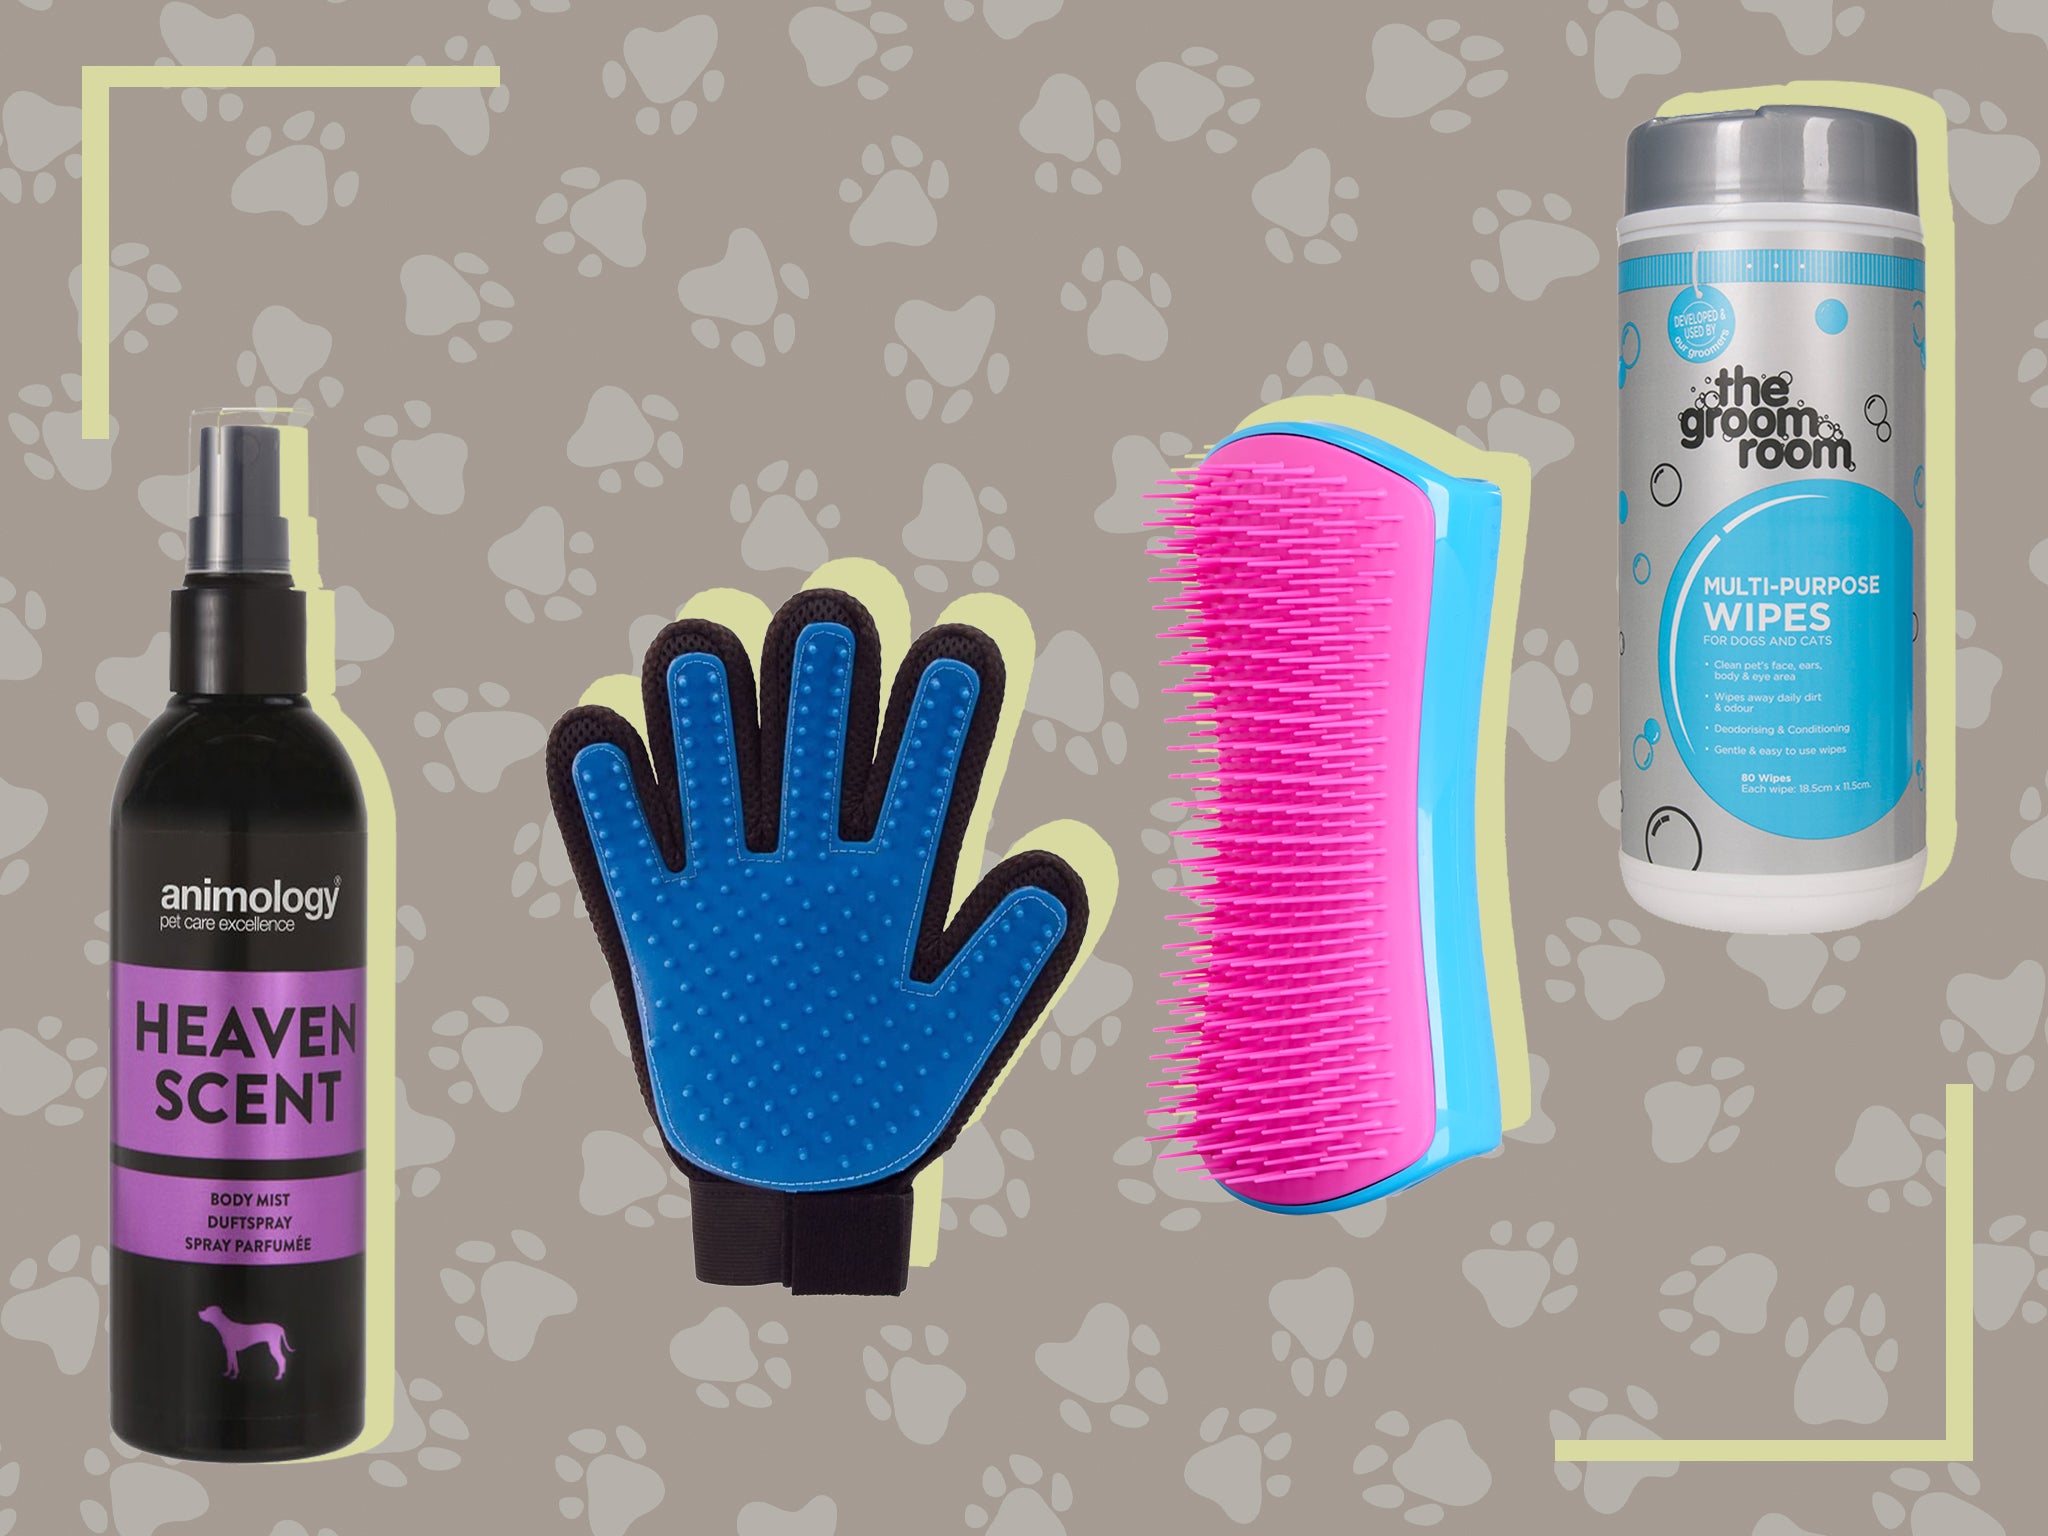 Best dog grooming products: Clippers, shampoo and towels | The Independent